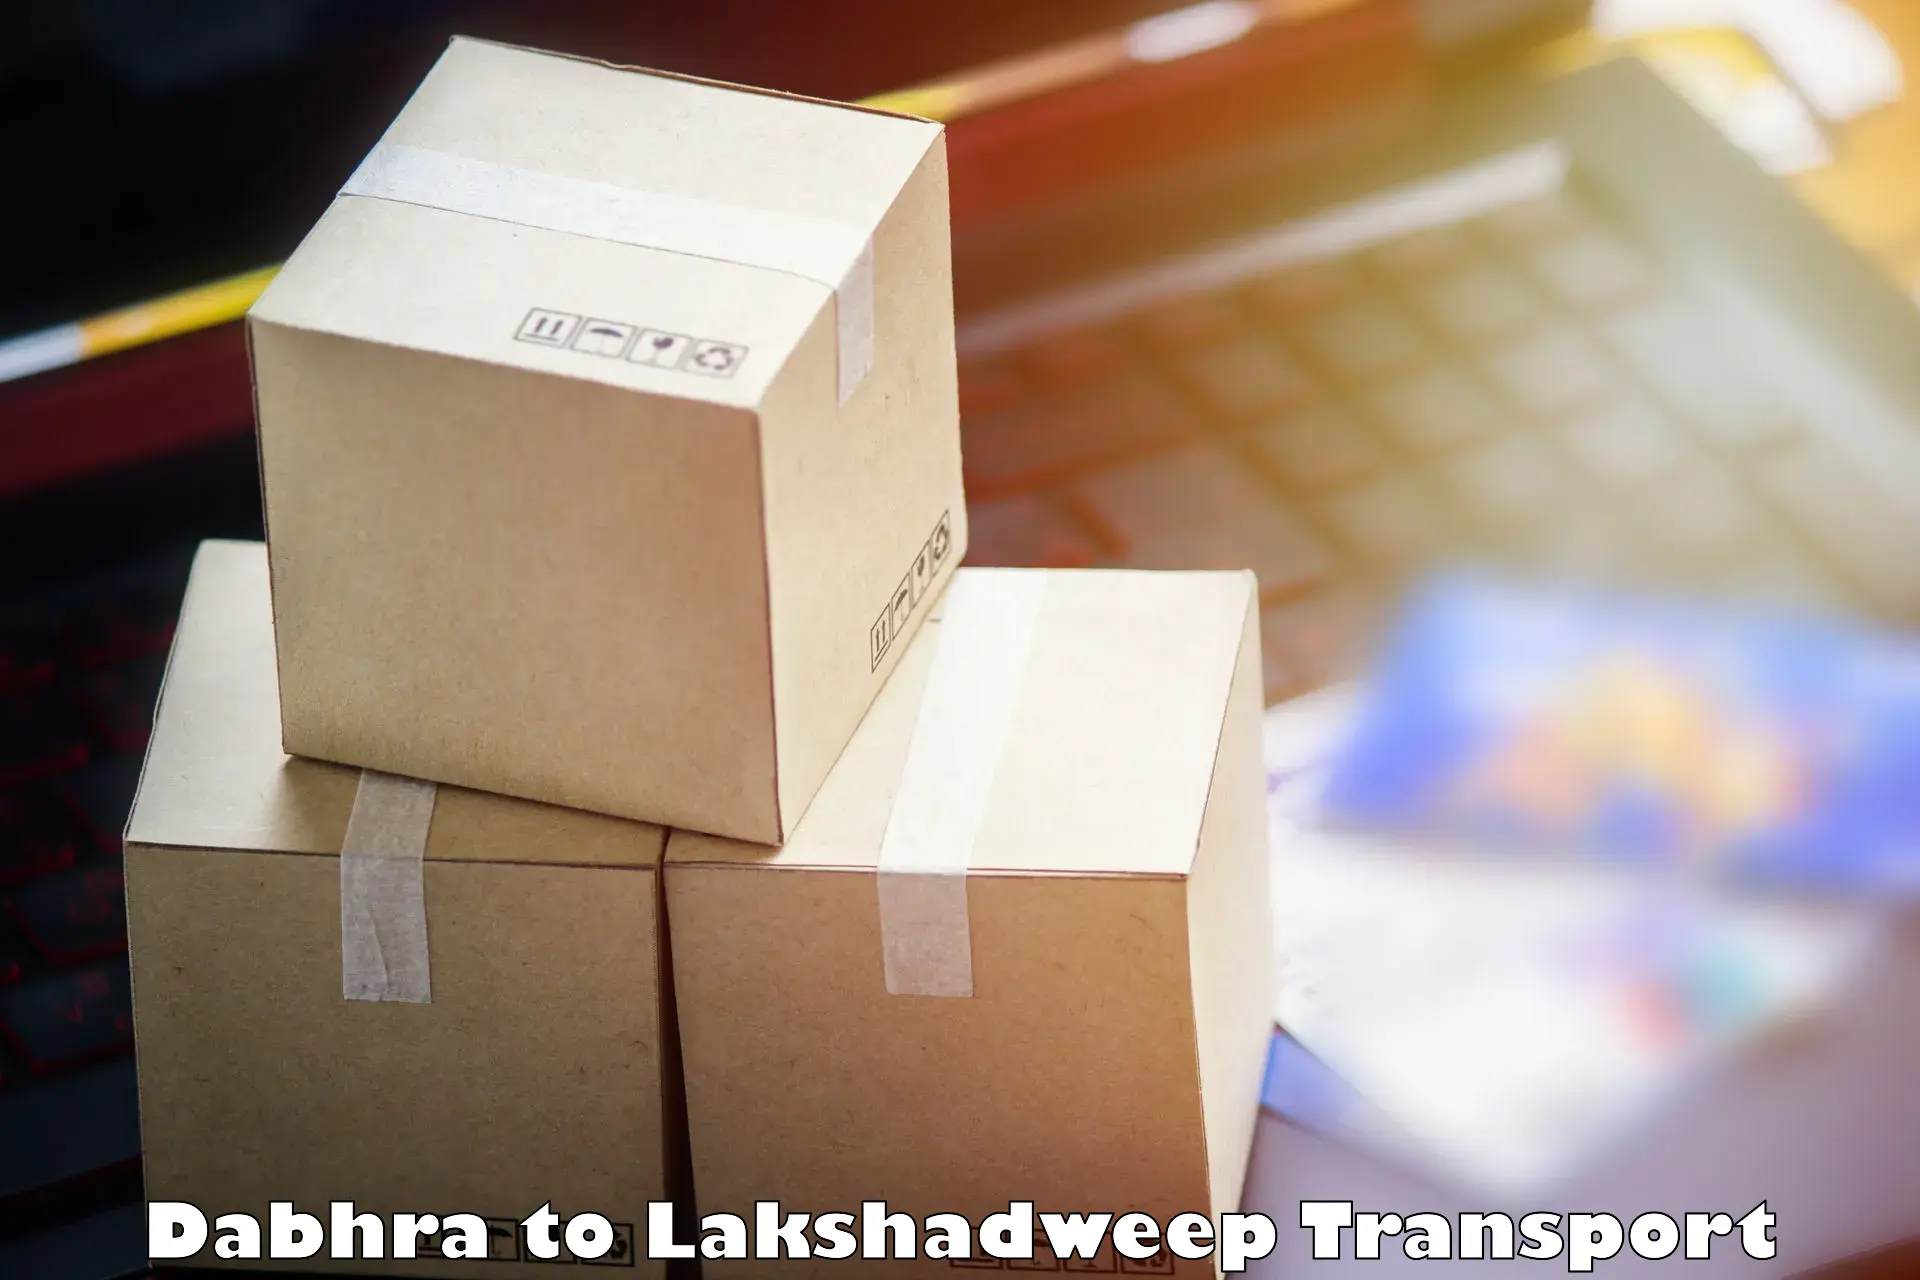 Container transport service Dabhra to Lakshadweep